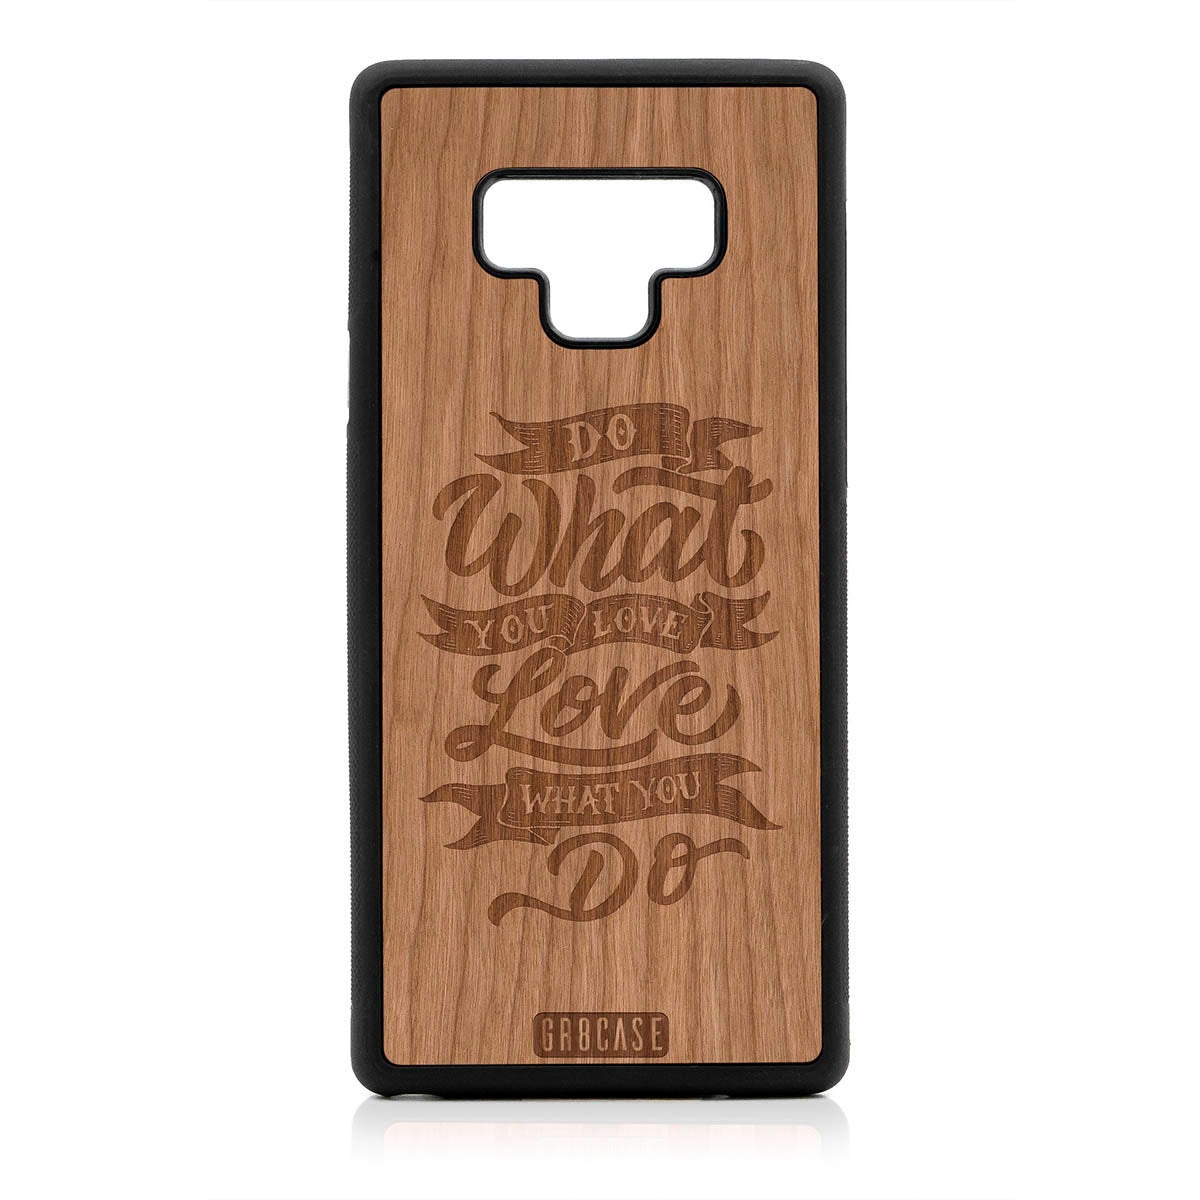 Do What You Love Love What You Do Design Wood Case For Samsung Galaxy Note 9 by GR8CASE